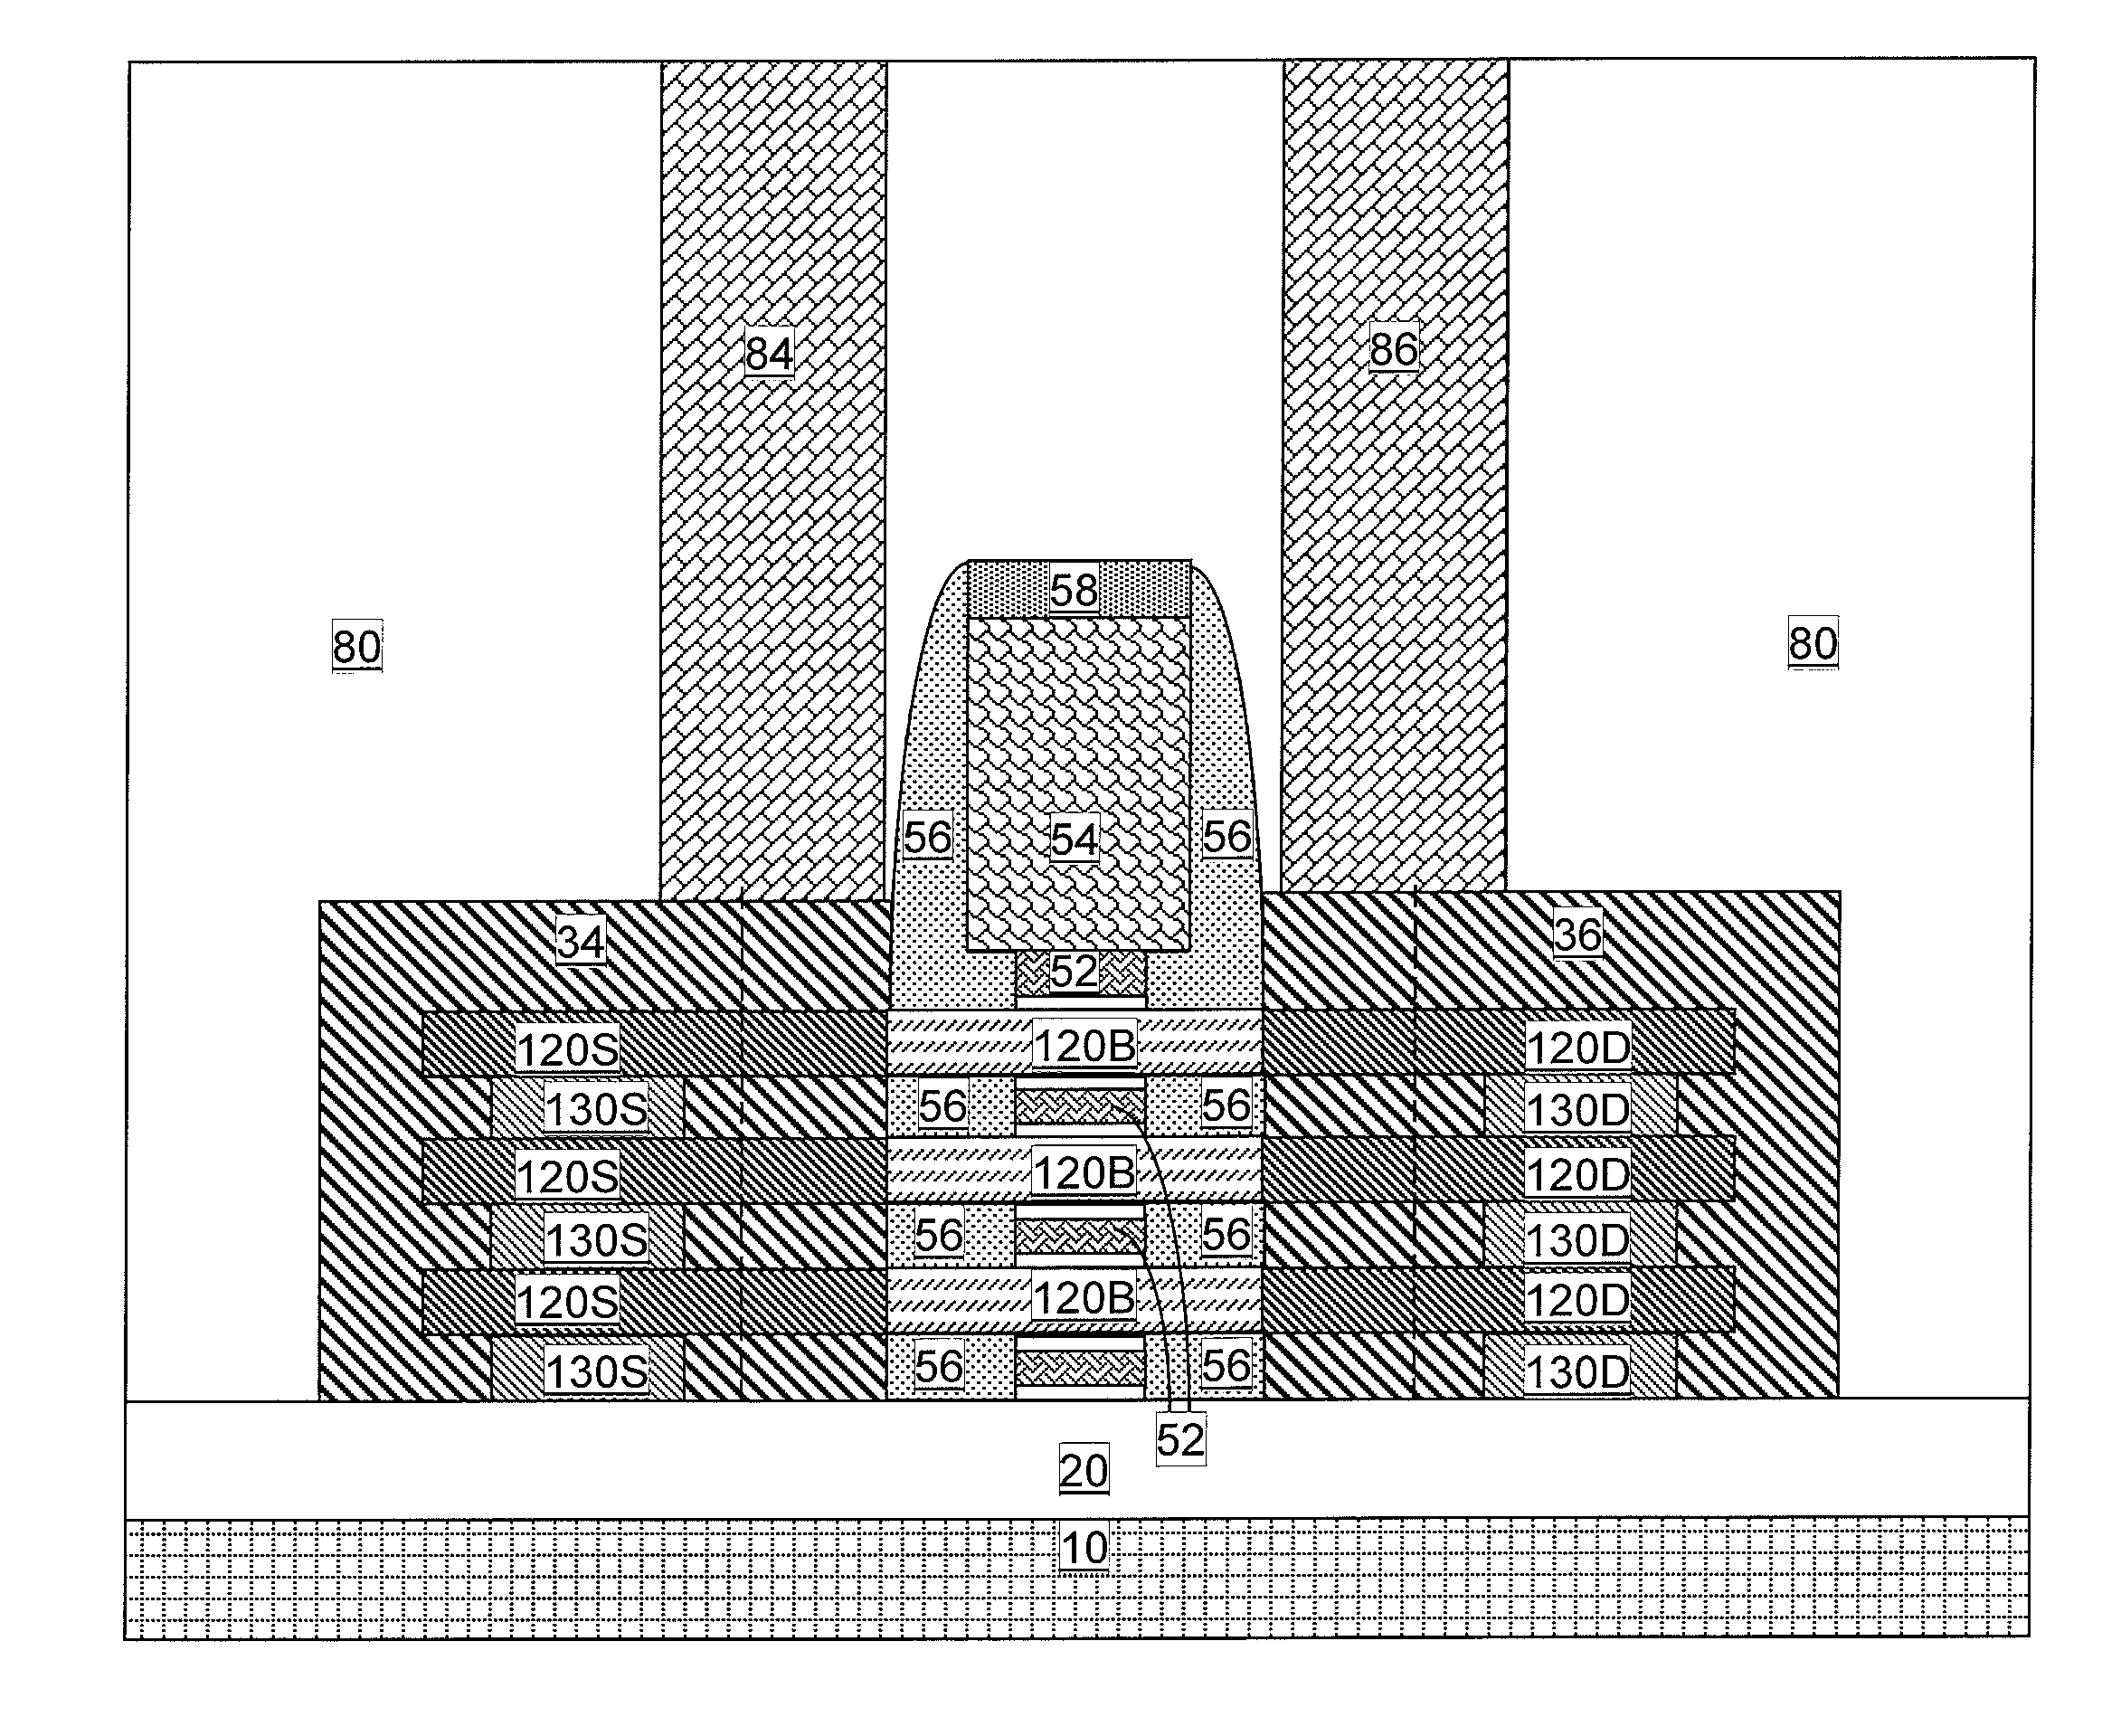 Non-replacement gate nanomesh field effect transistor with pad regions